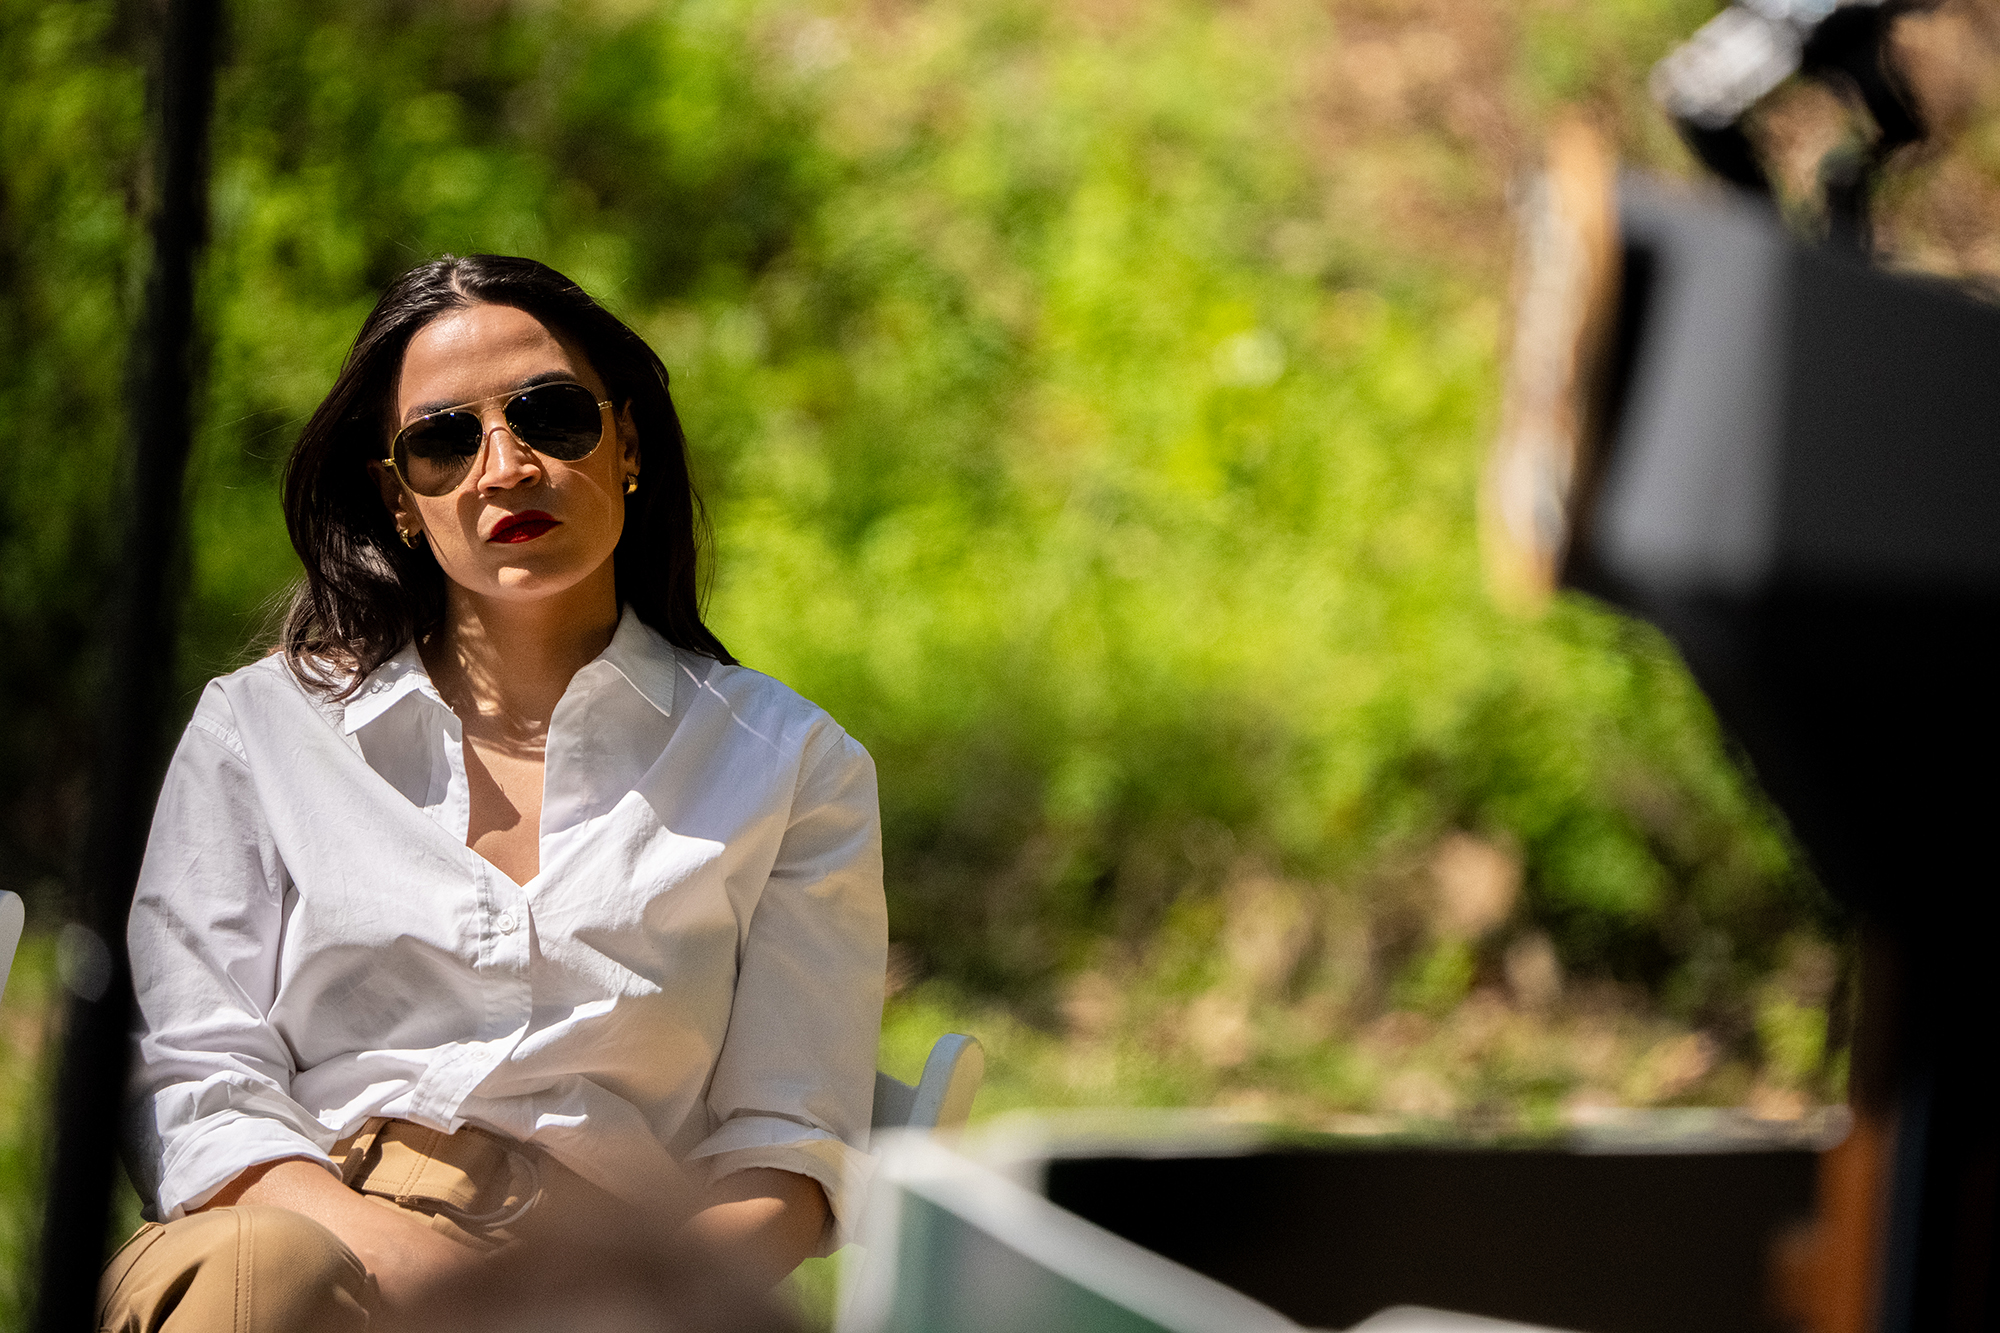 Rep. Alexandria Ocasio-Cortez (D-NY) on April 22 in Triangle, Virginia, as Joe Biden speaks on Earth Day at Prince William Forest Park.